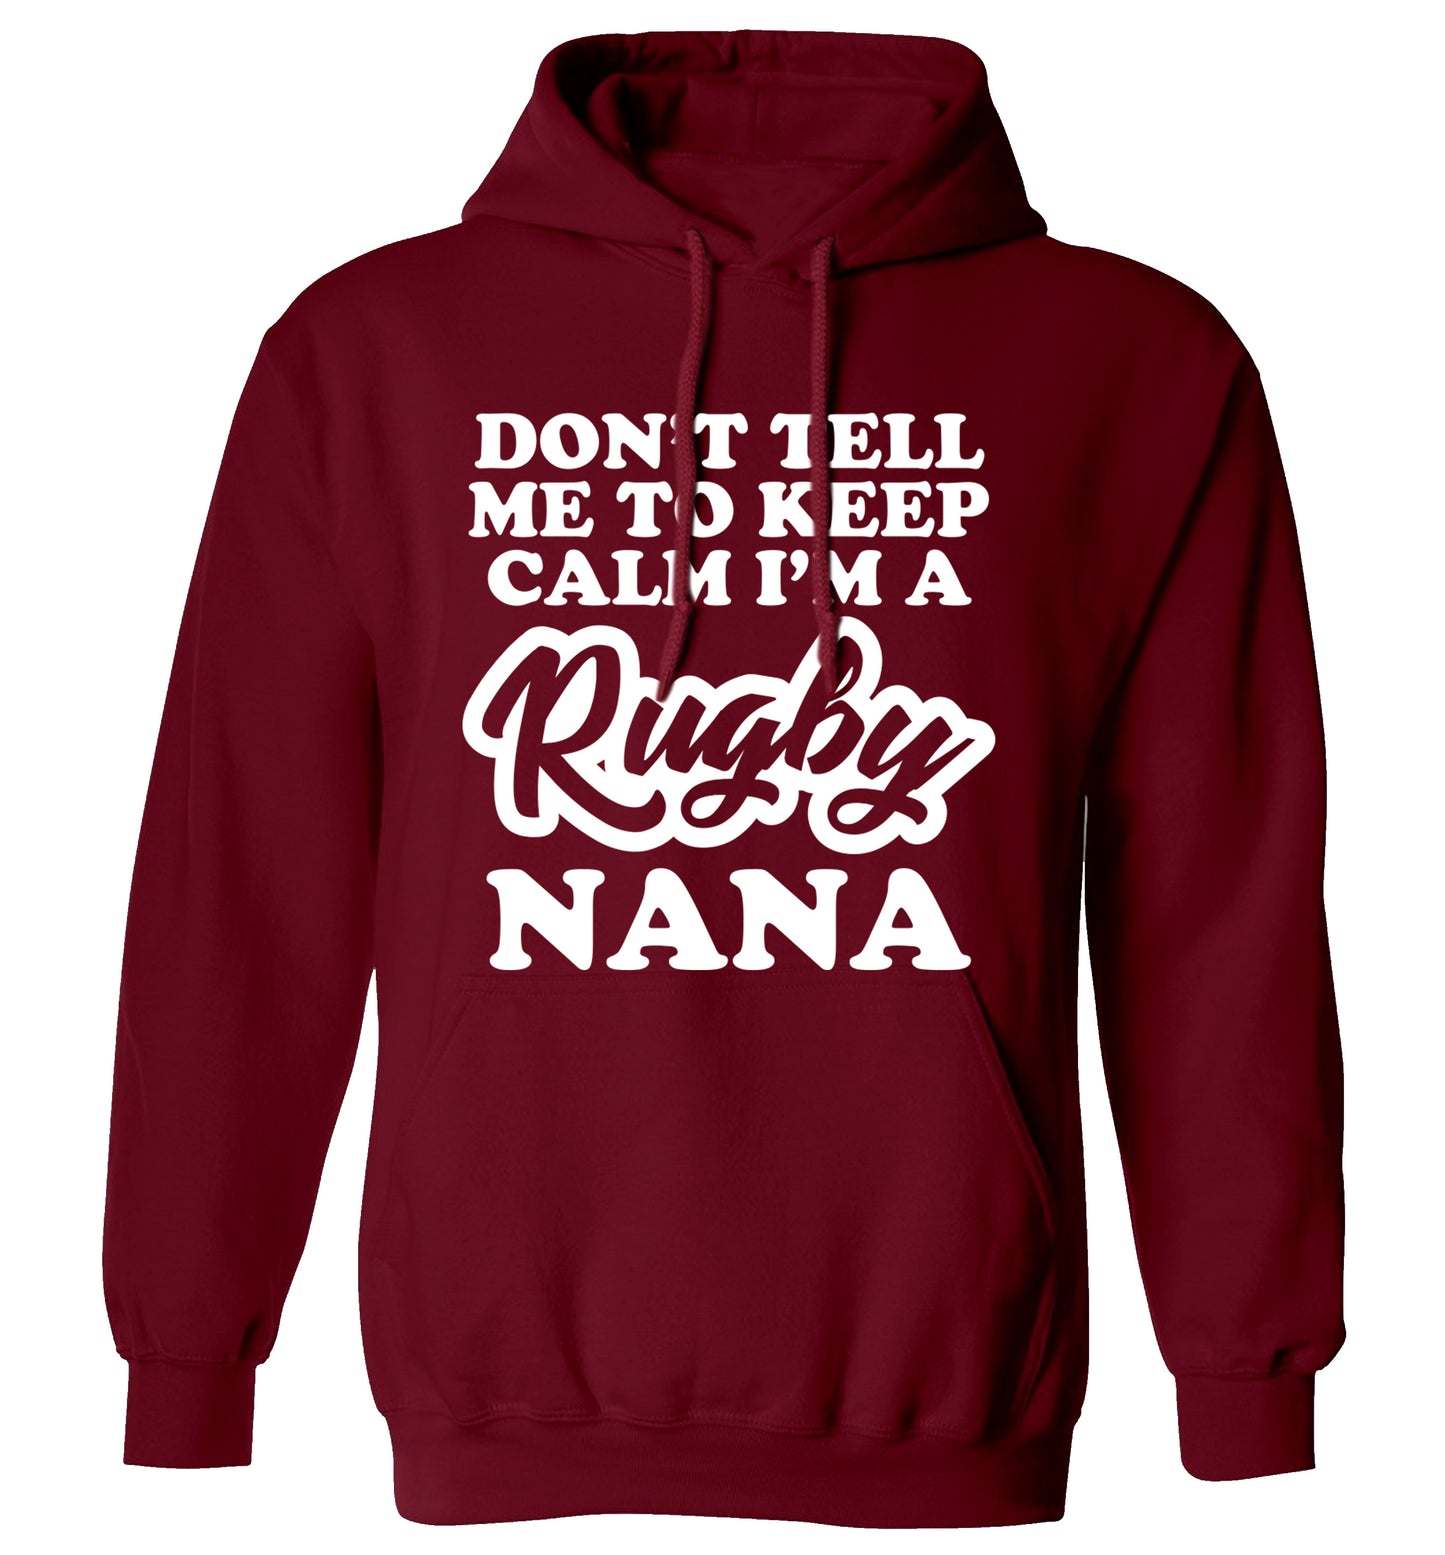 Don't tell me to keep calm I'm a rugby nana adults unisex maroon hoodie 2XL